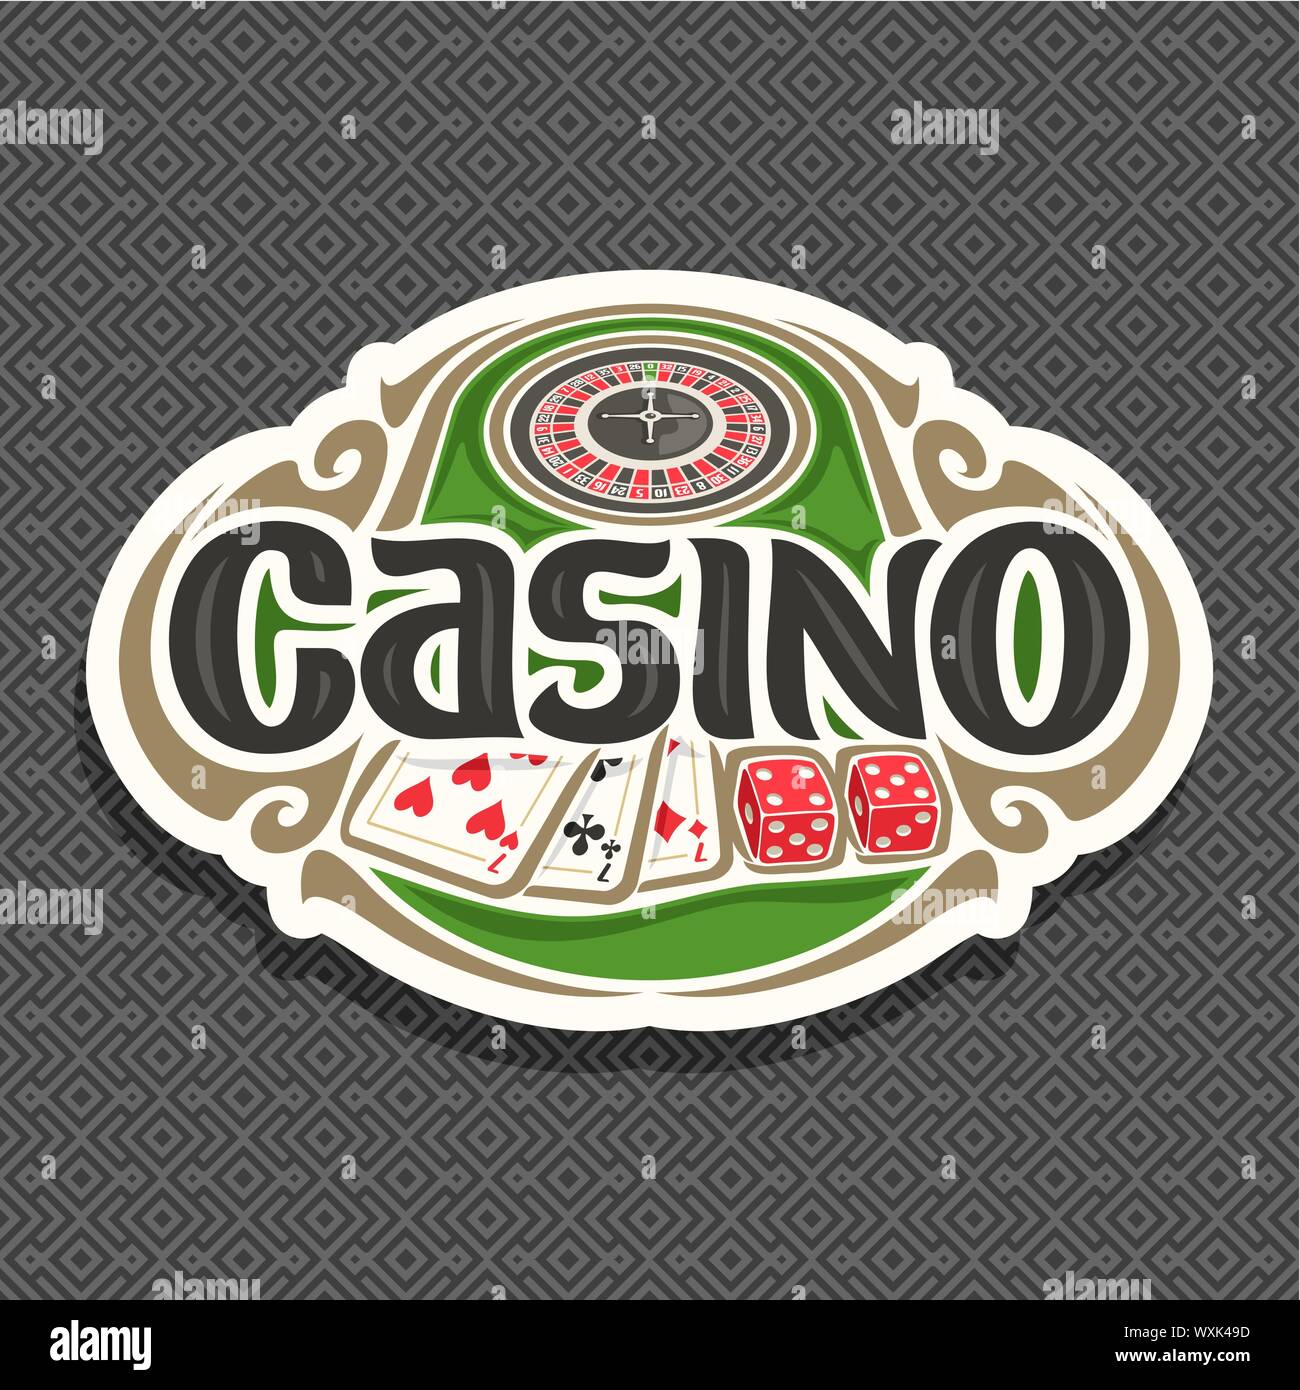 Vector logo for Casino club on grey background: roulette wheel on green table, lettering - casino, combination of playing cards 3 seven for blackjack, Stock Vector